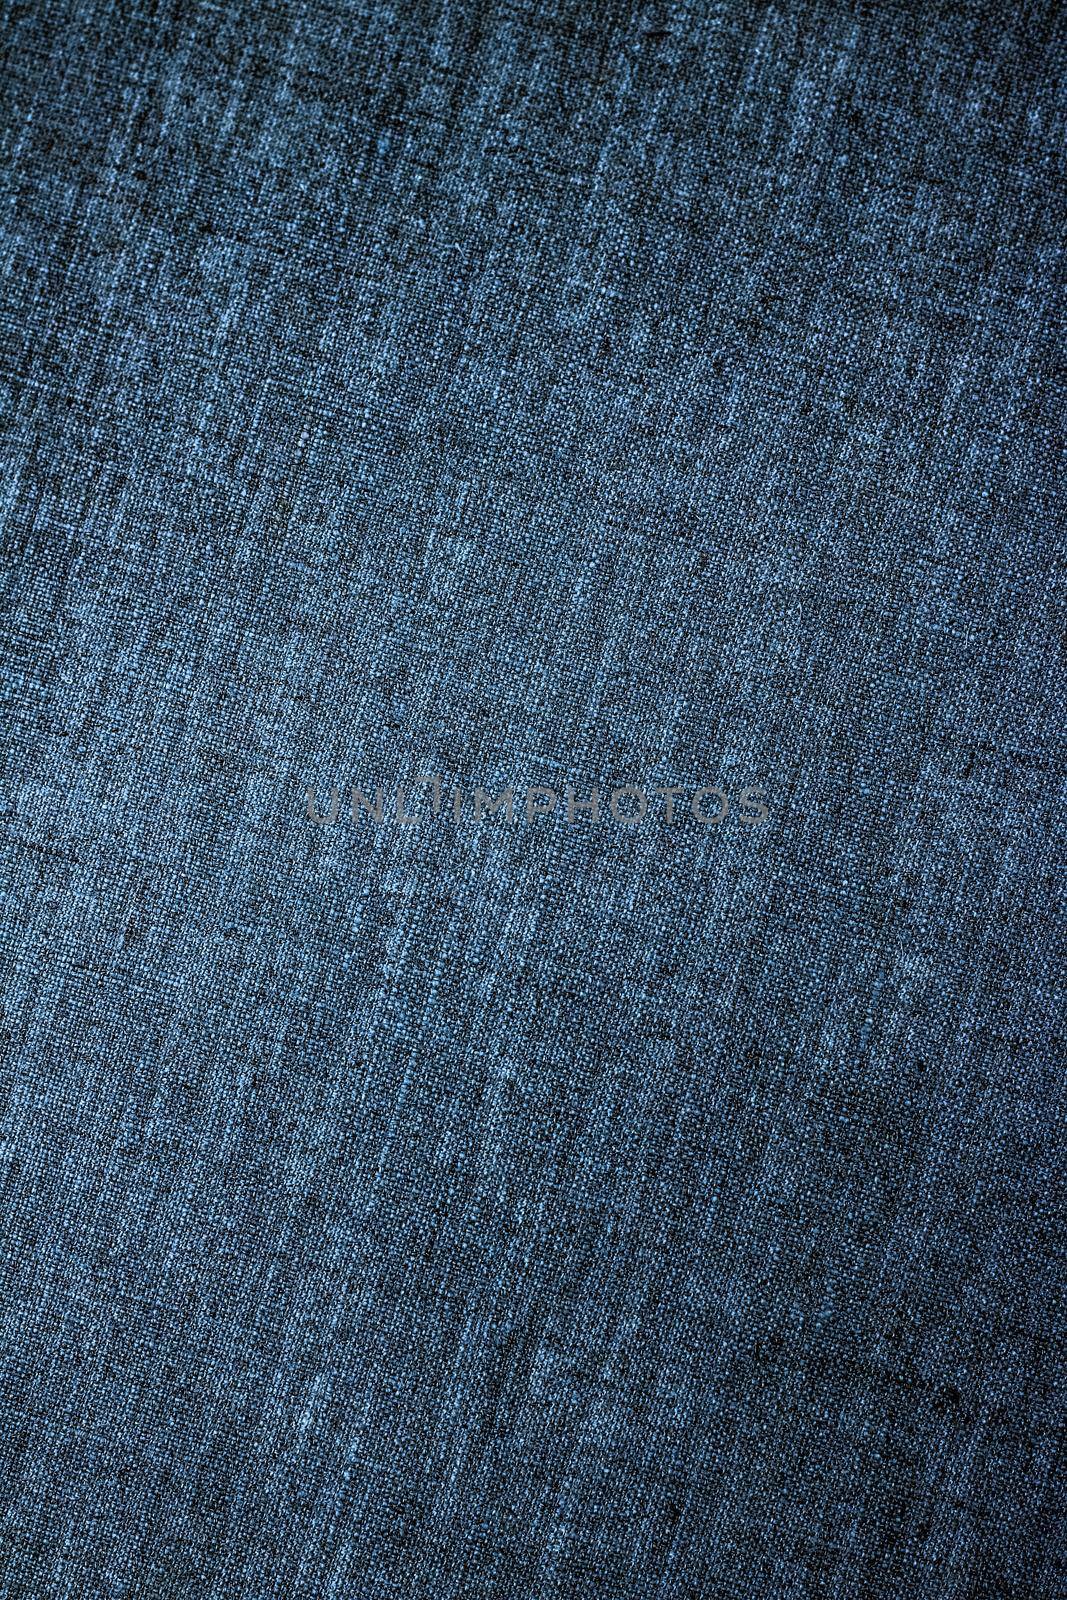 Decorative linen blue jeans fabric textured background for interior, furniture design and fashion label backdrop by Anneleven